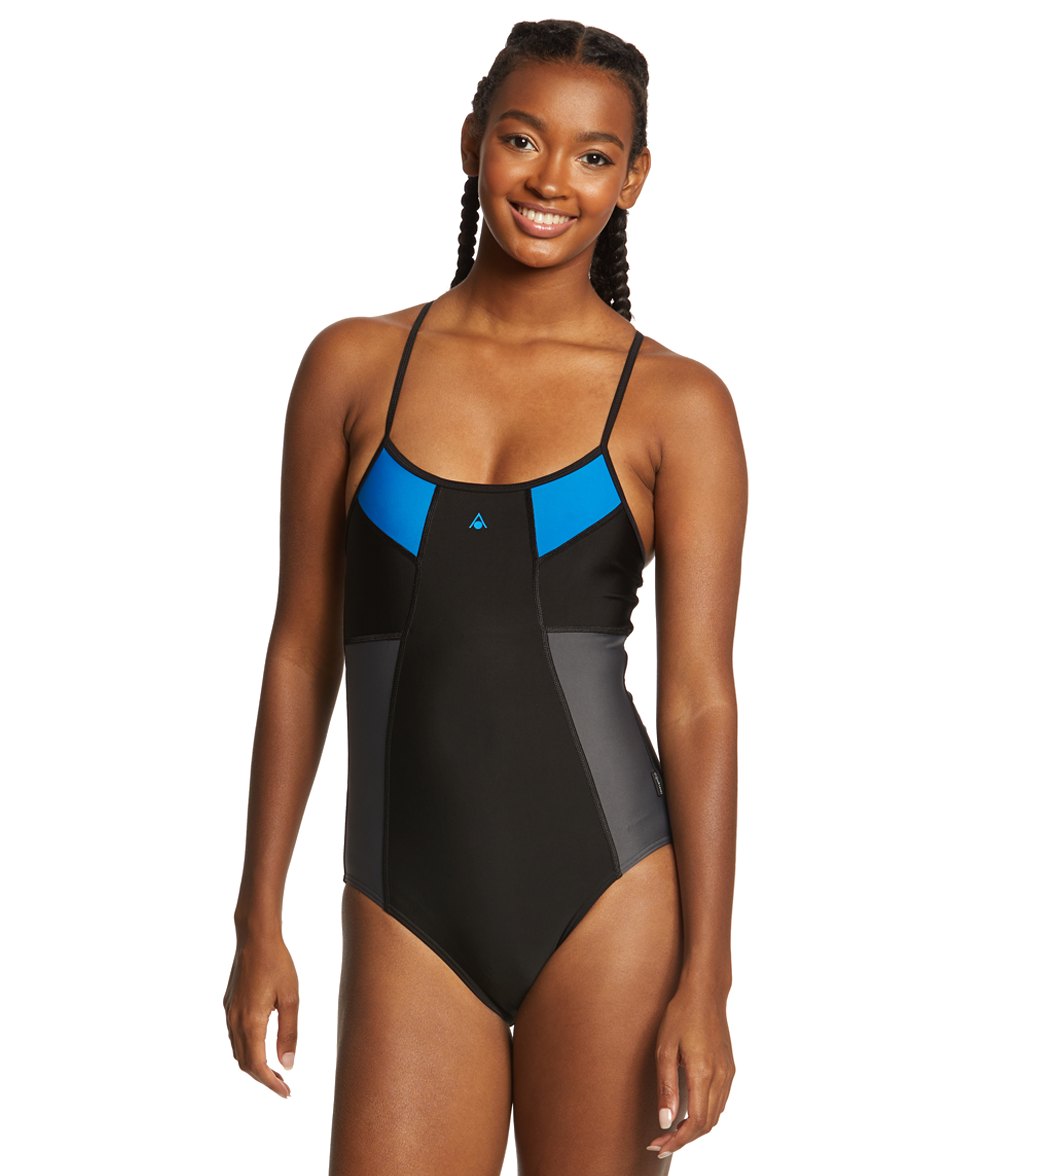 Aqua Sphere Clover Chic Back - Black/Turquoise 32 Polyester - Swimoutlet.com